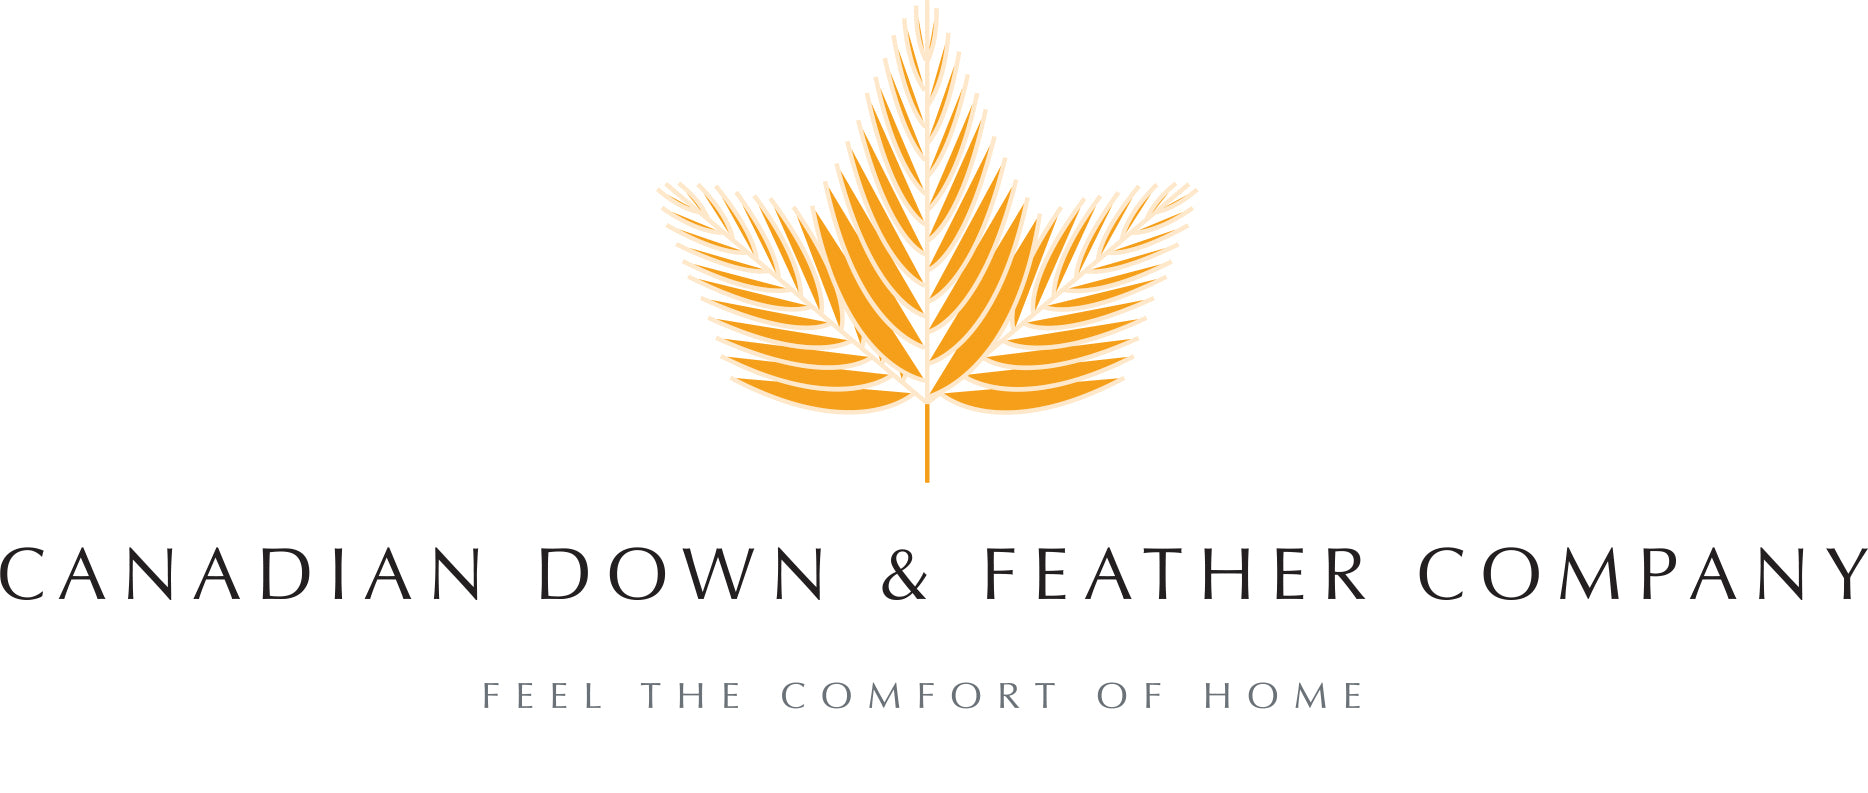 Manufacturer of Down and Feather Products